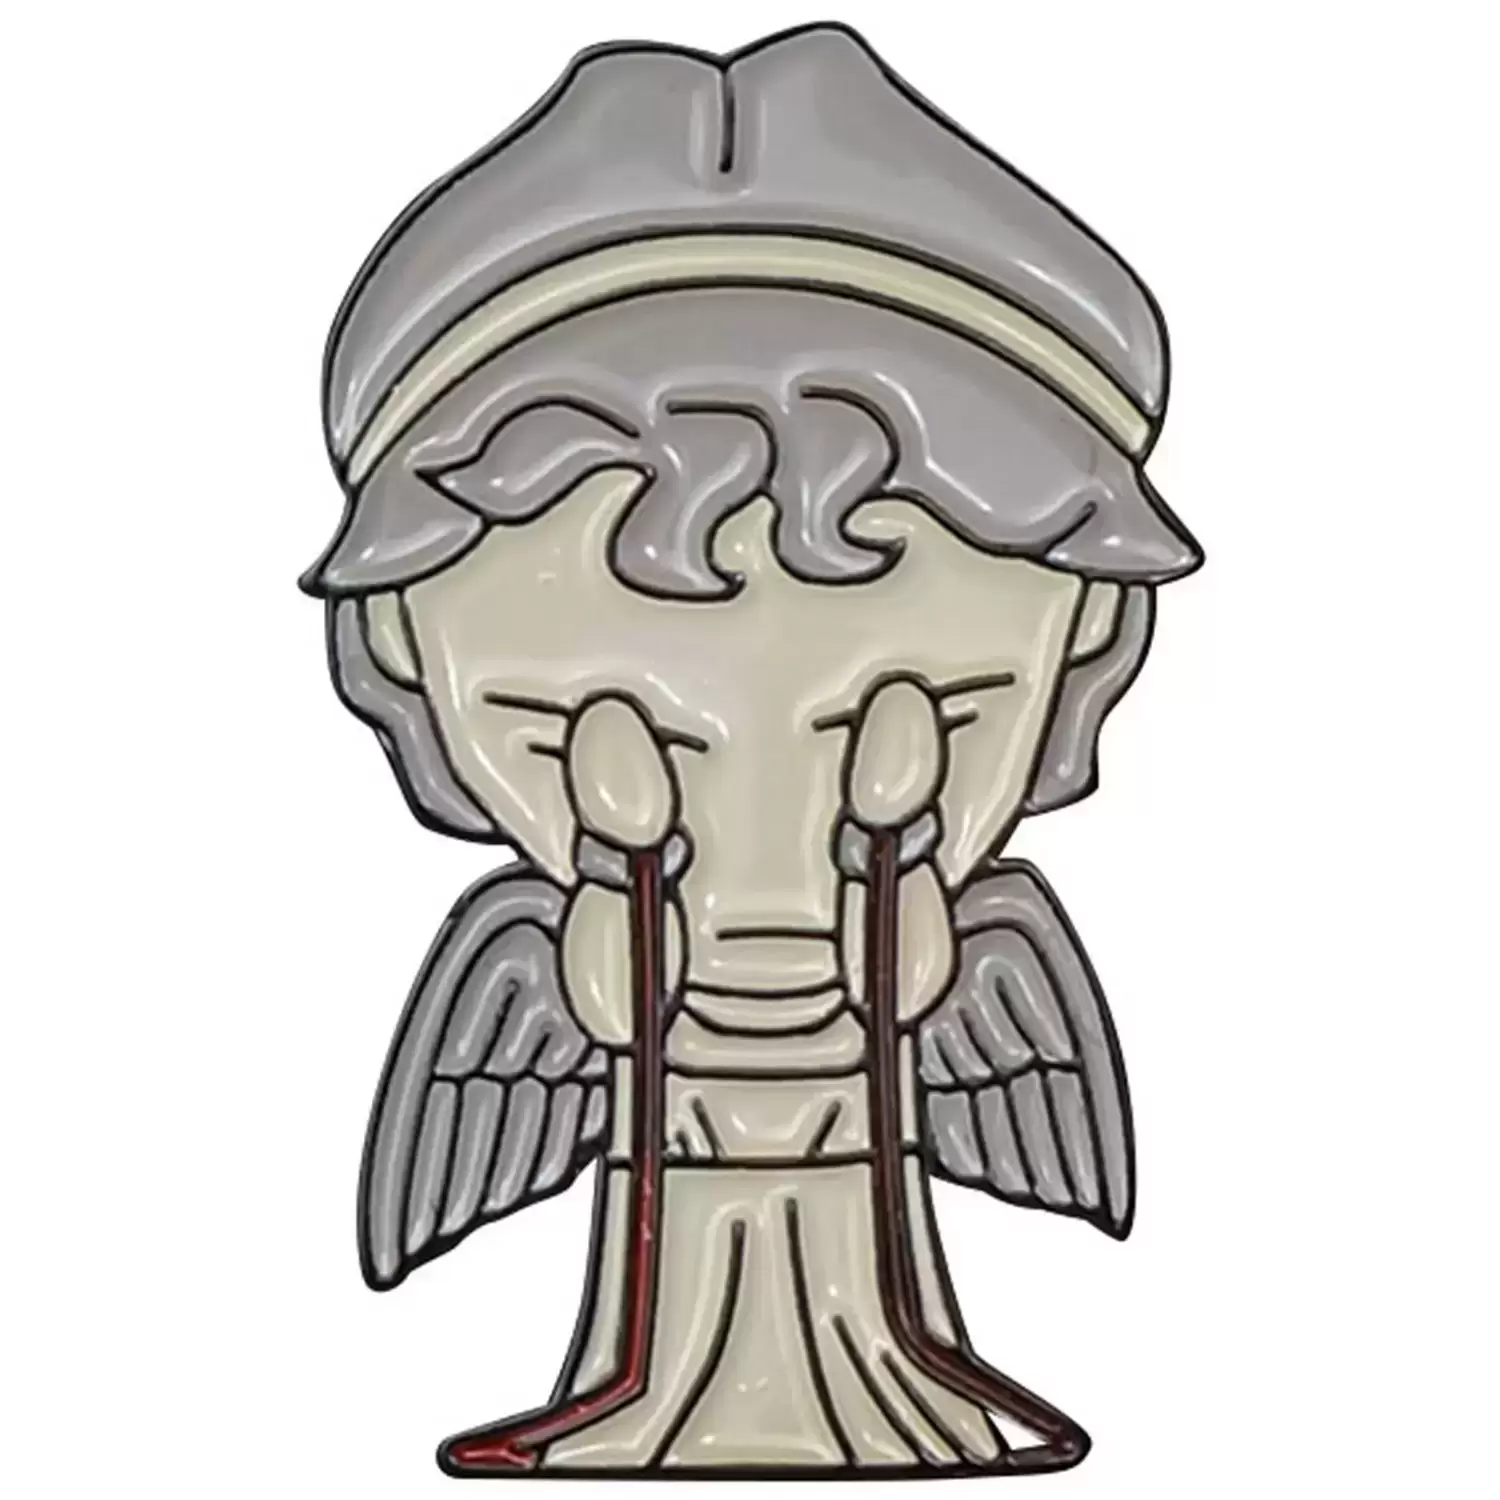 Doctor Who - Weeping Angel (Revolution of the Daleks)